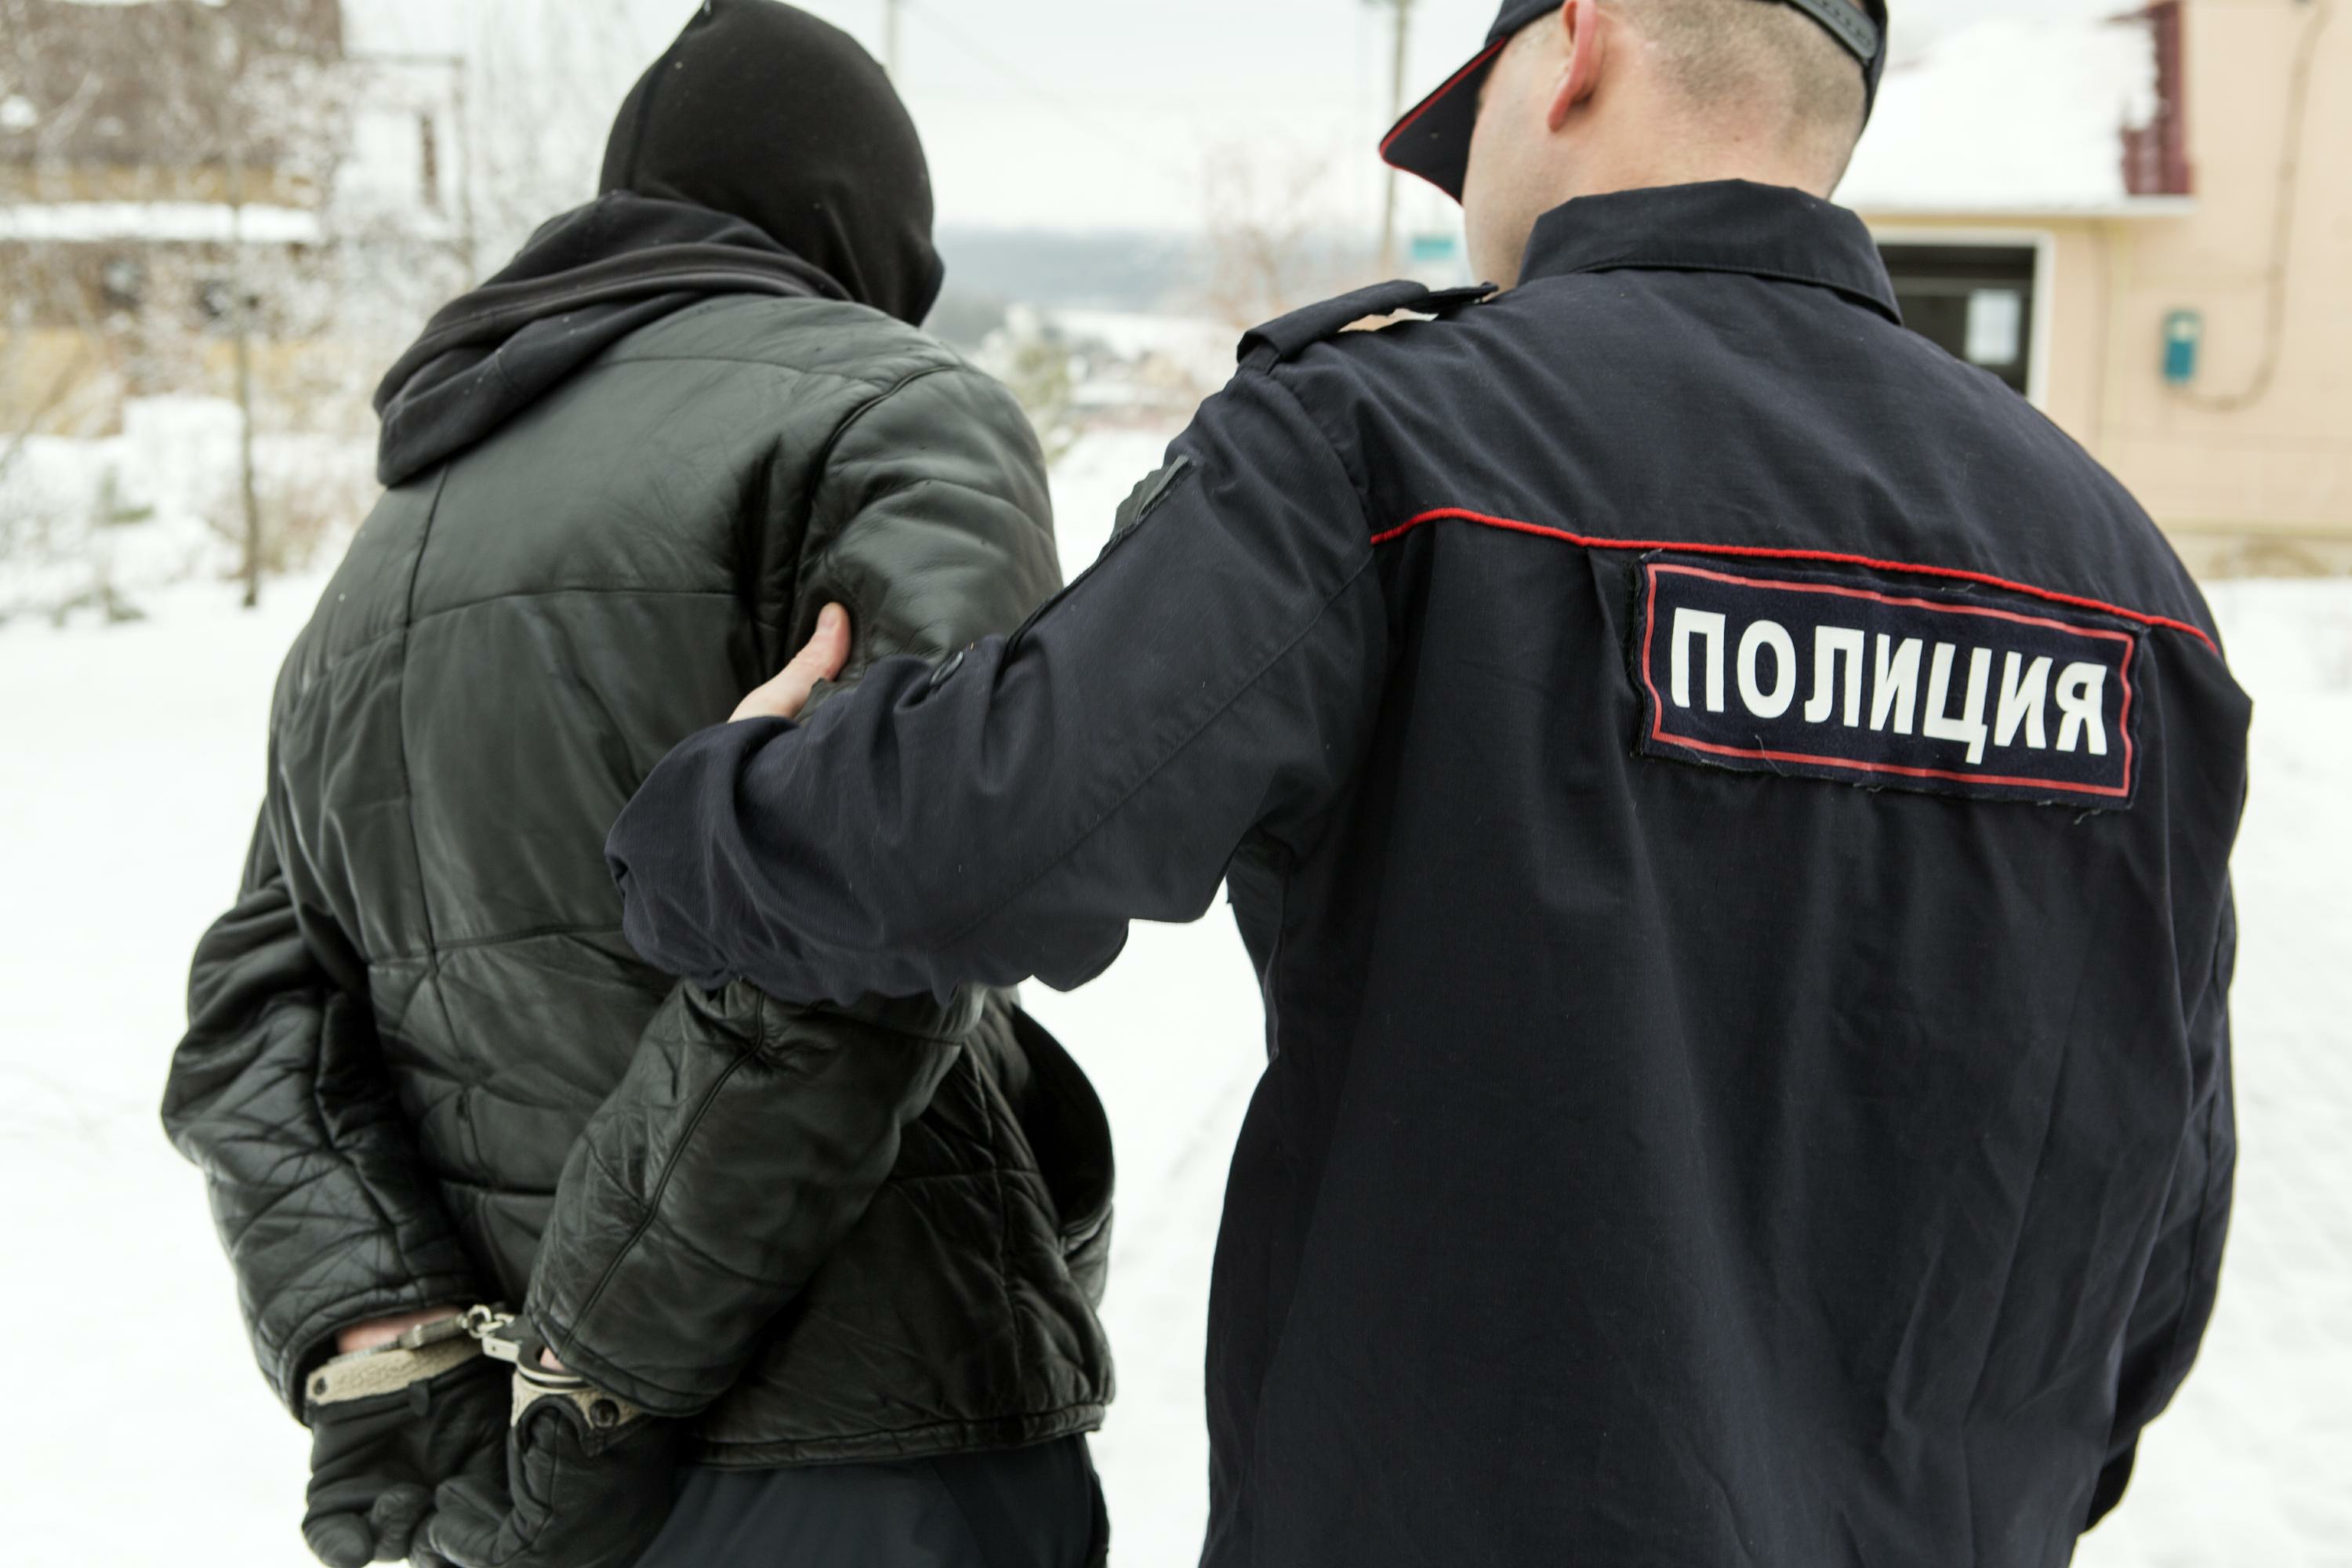 Russian Federation. A police officer at work.